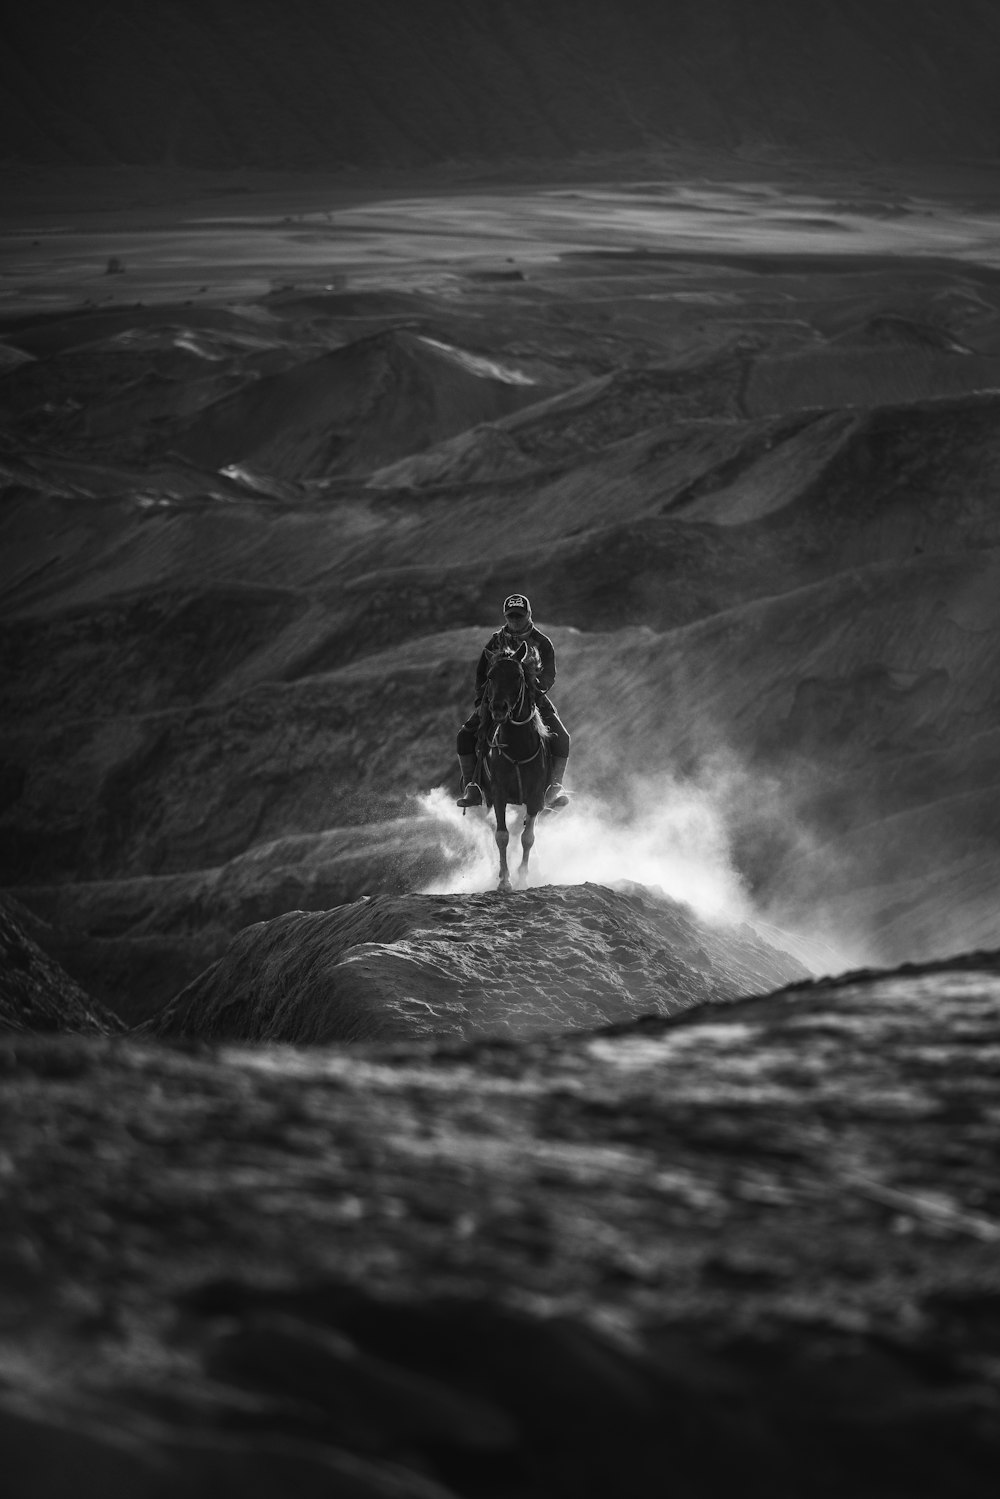 grayscale photography of man riding on horse